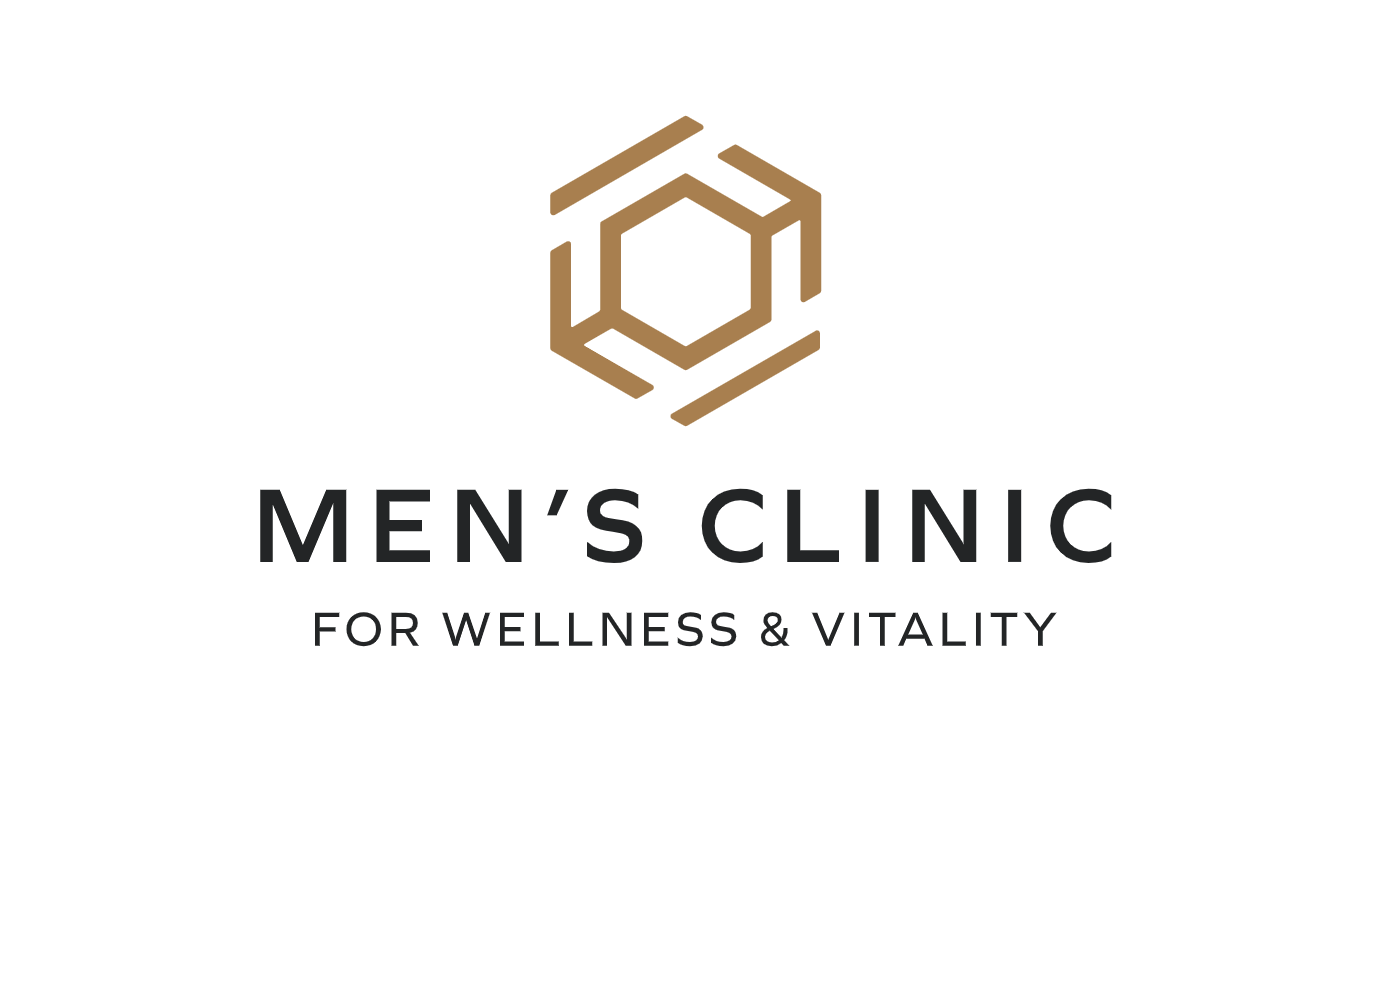 The Men's Clinic for Wellness and Vitality